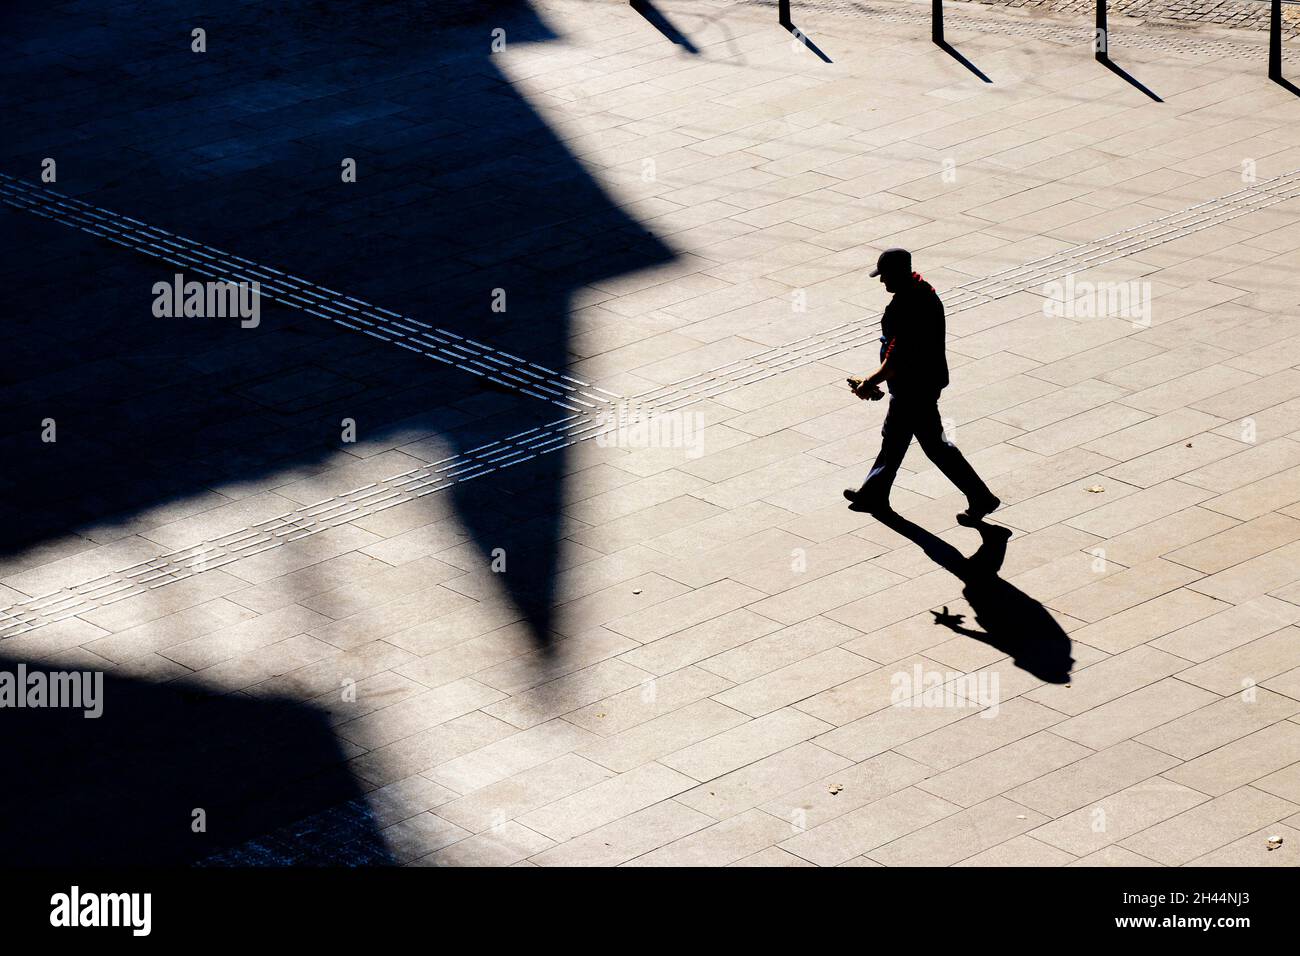 Belgrade, Serbia - October 25, 2020: One mature man wearing cap walking alone across the city paved square, high angle view with shadows Stock Photo